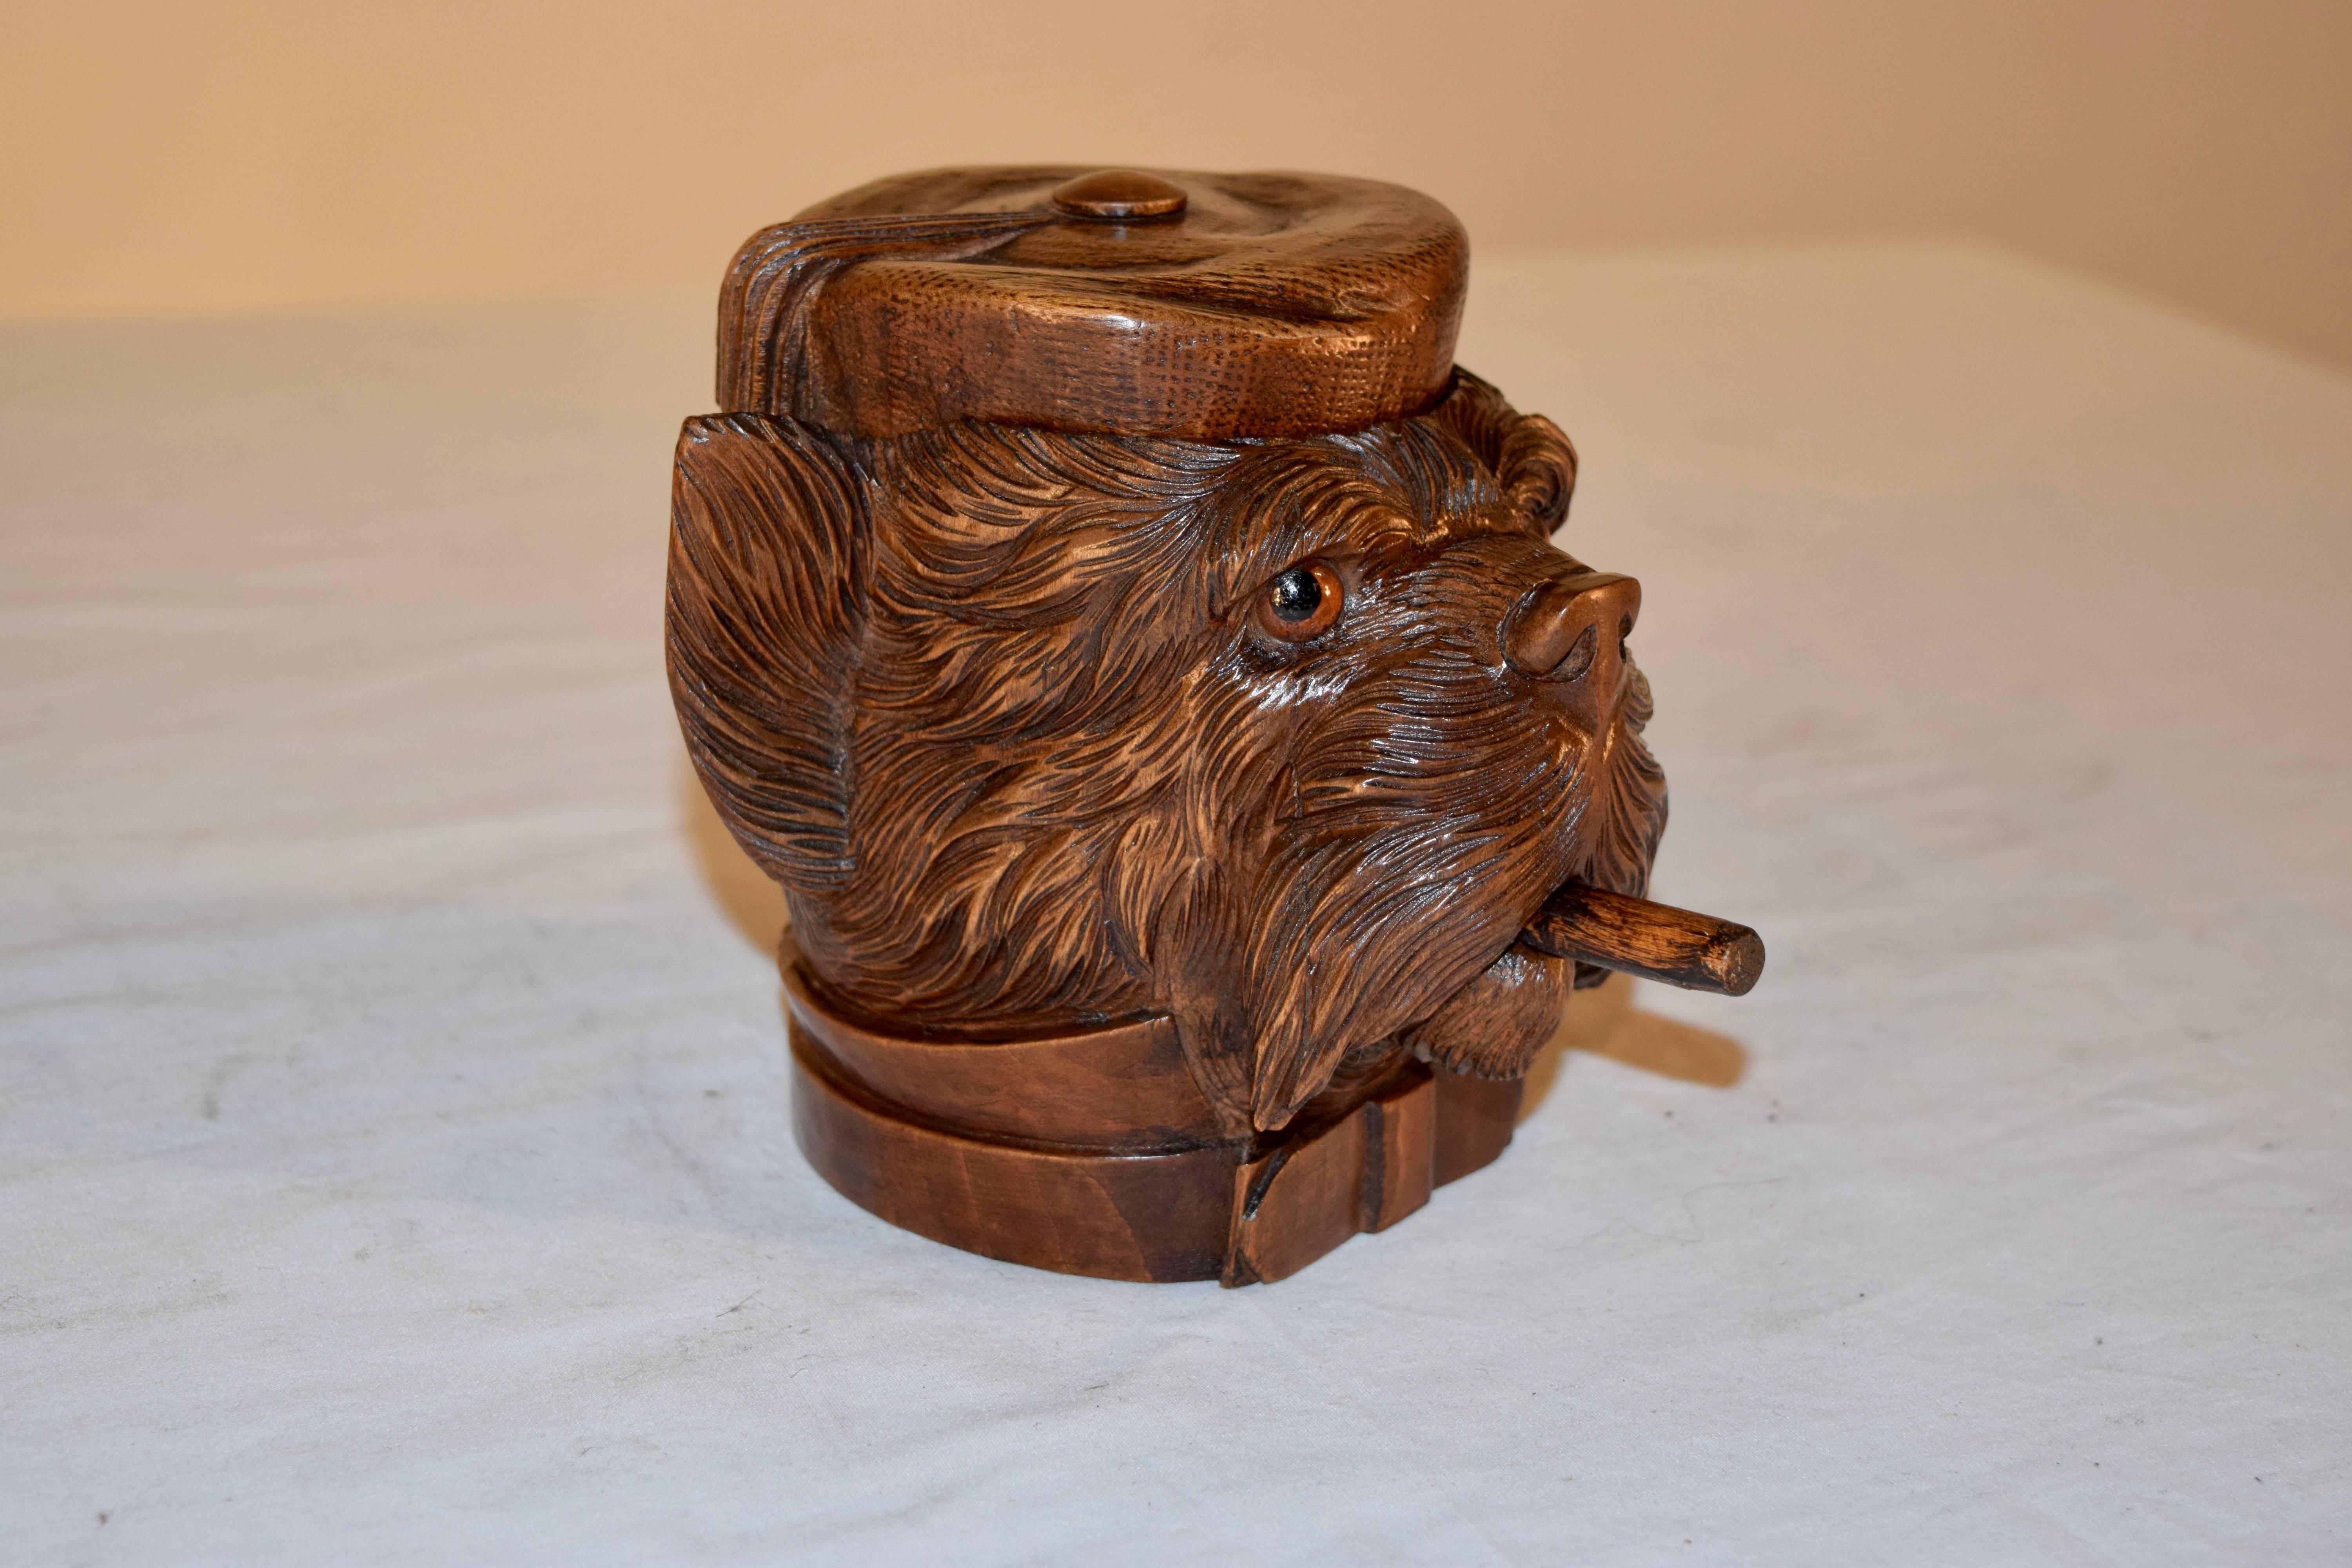 19th century Black Forest hand-carved humidor in the form of a terrier. His hat lifts to reveal an open compartment for storage.